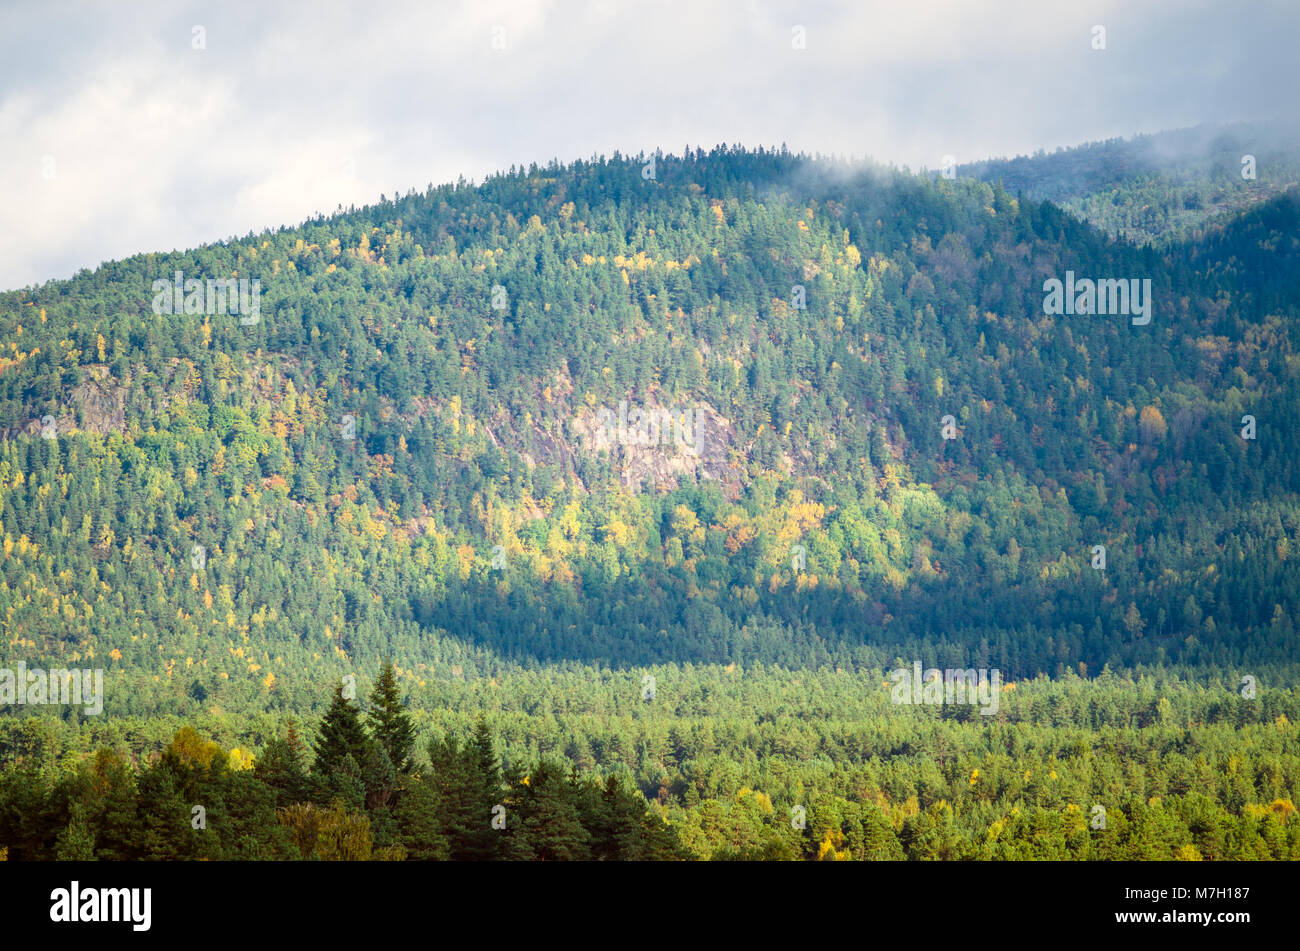 Landscape of central Norway midland with low mountains covered by forest. Evje, middle of Norway. Stock Photo